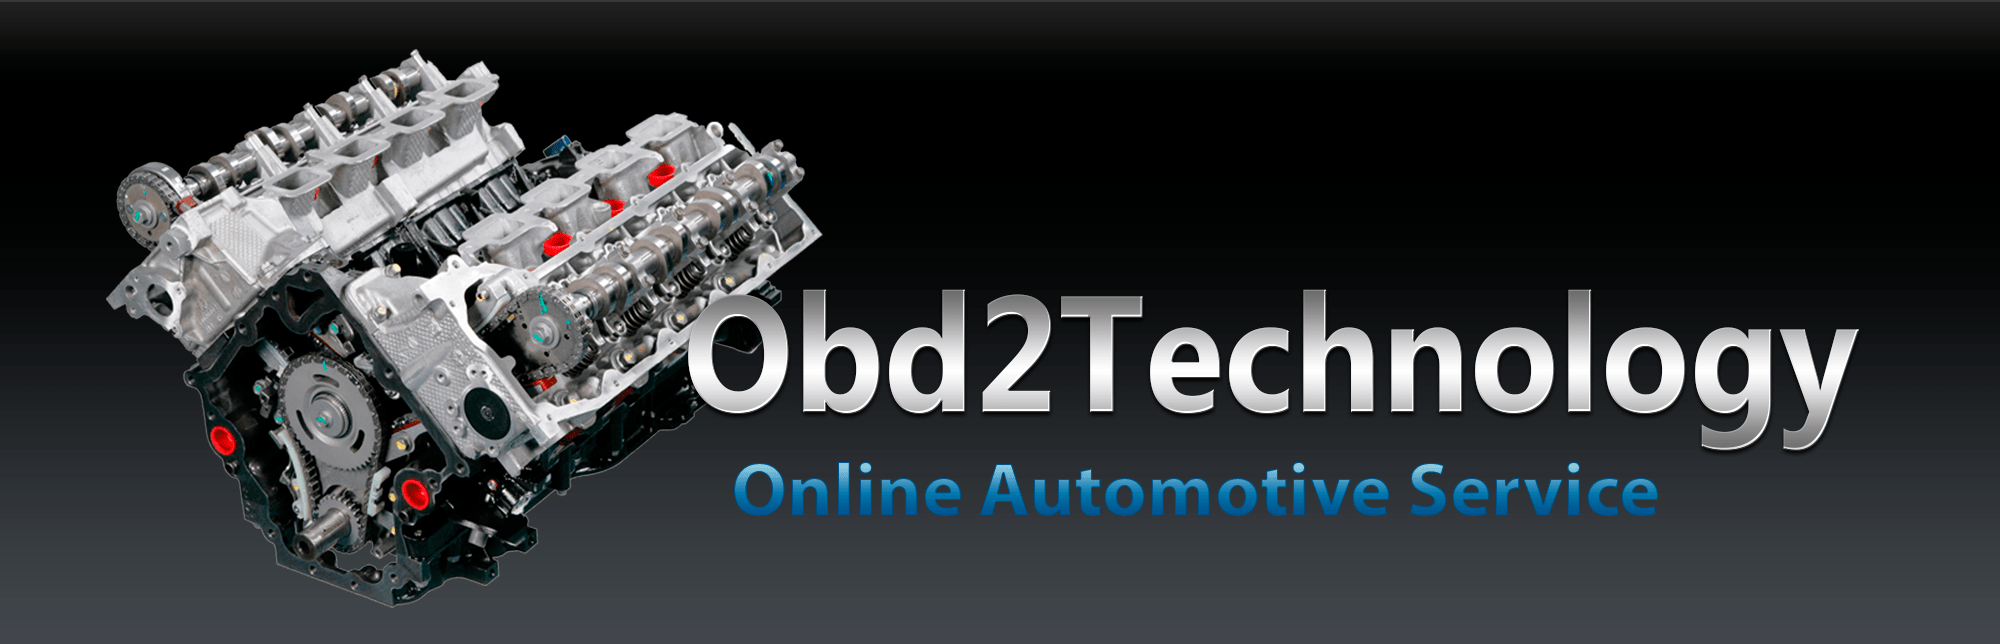 obd2technology shop how to search